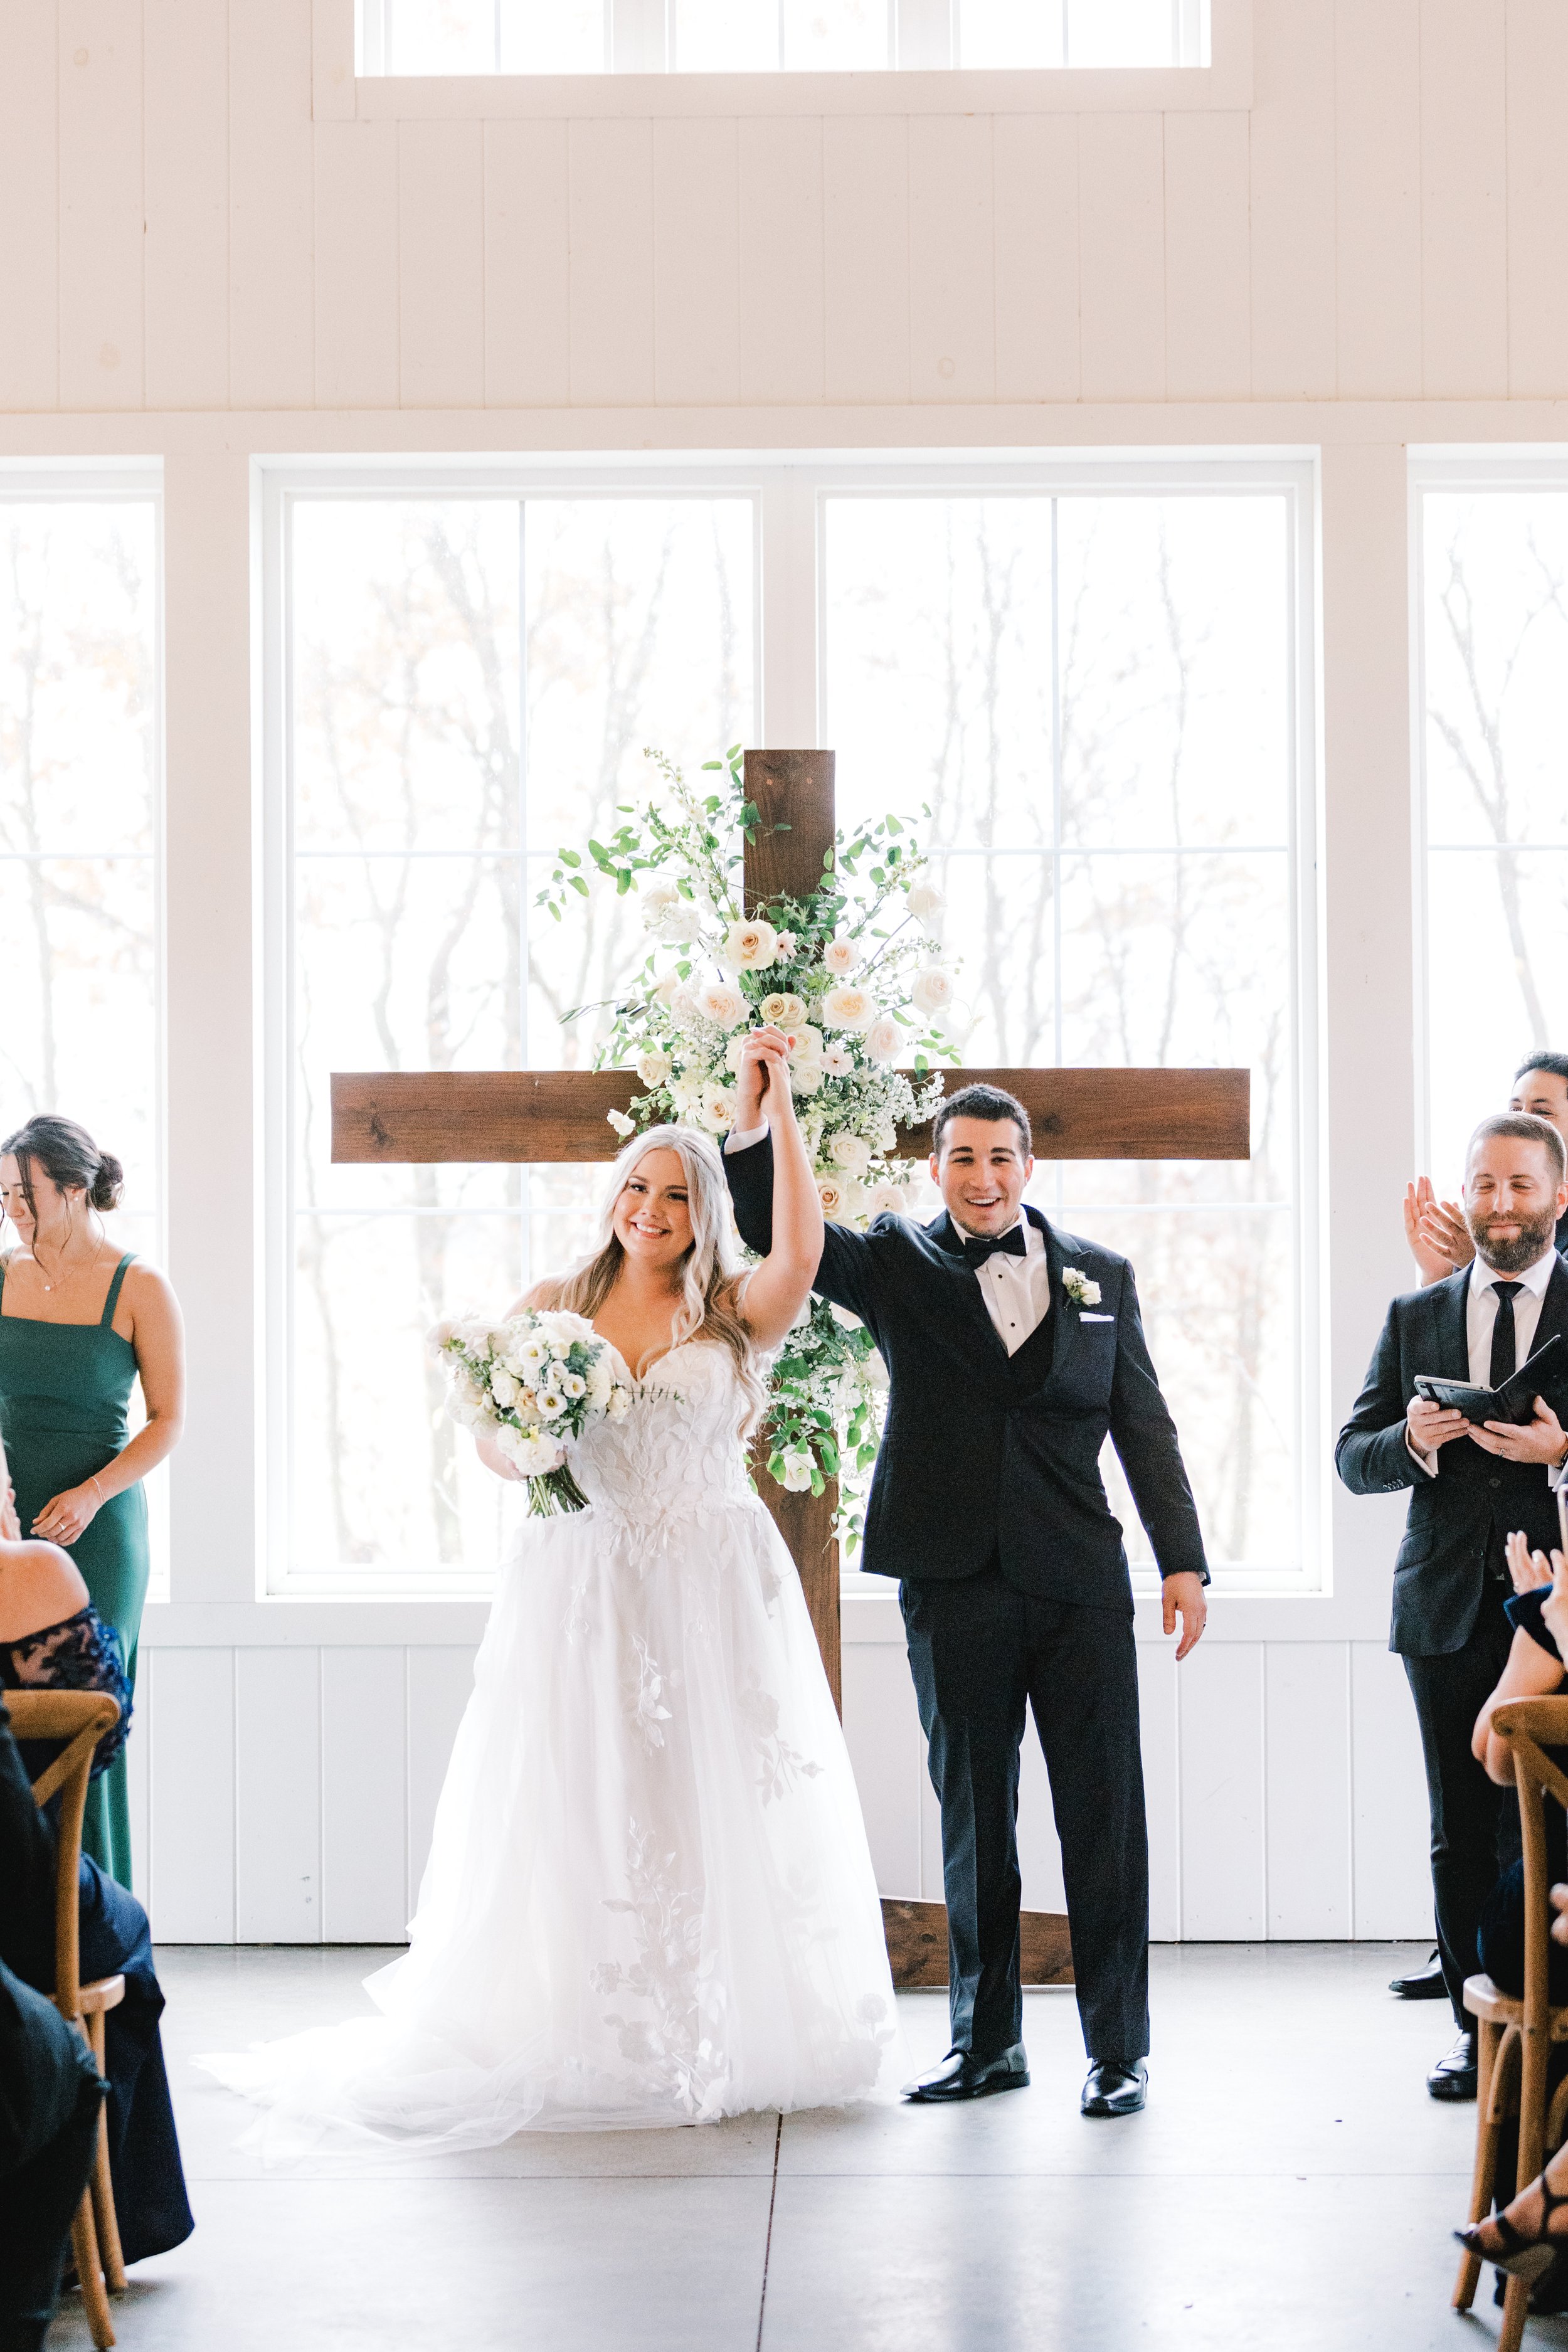 savannah-bride-jessica-in-hattie-lane-by-rebecca-ingram-an-a-line-bridal-gown-with-plunging-neckline-and-oversized-floral-lace-purchased-from-savannah-bridall-shop-ivory-and-beau-3.jpg